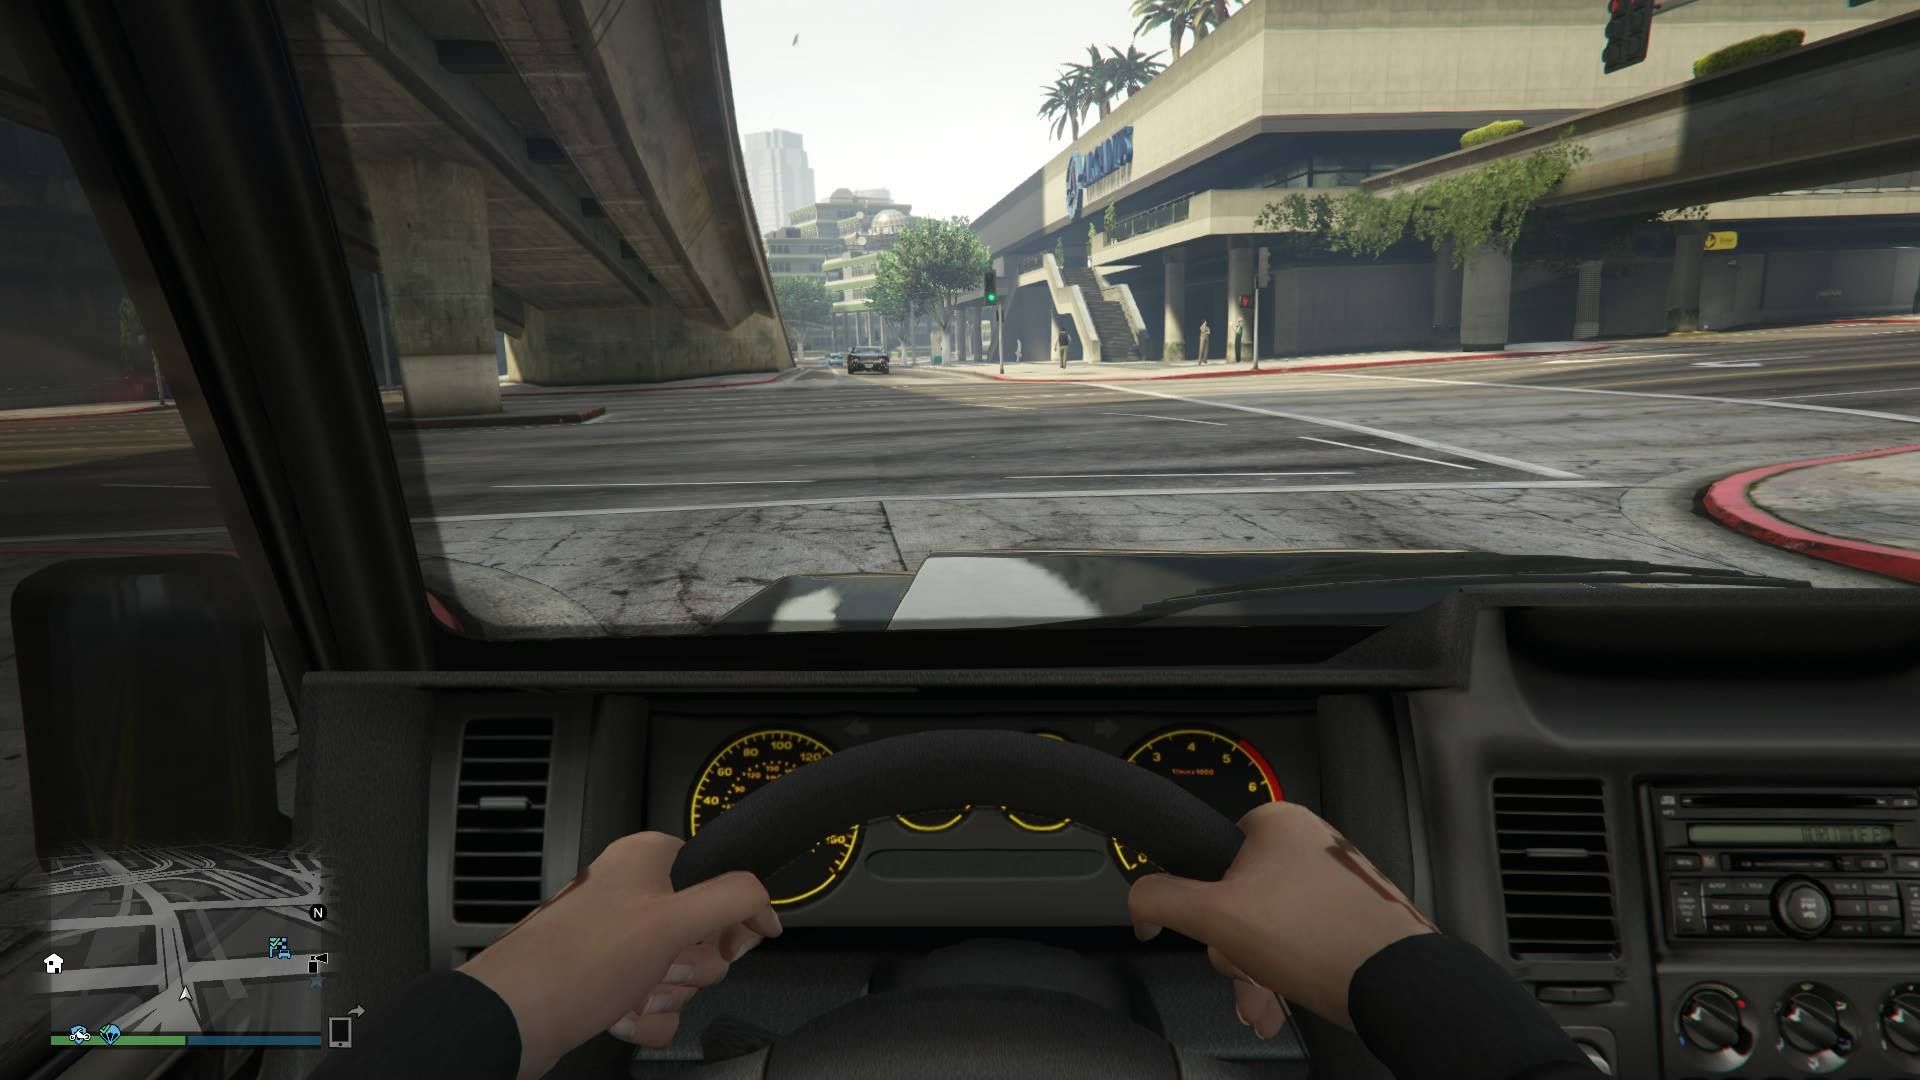 GTA 5's first-person mode is interesting, but not well implemented.